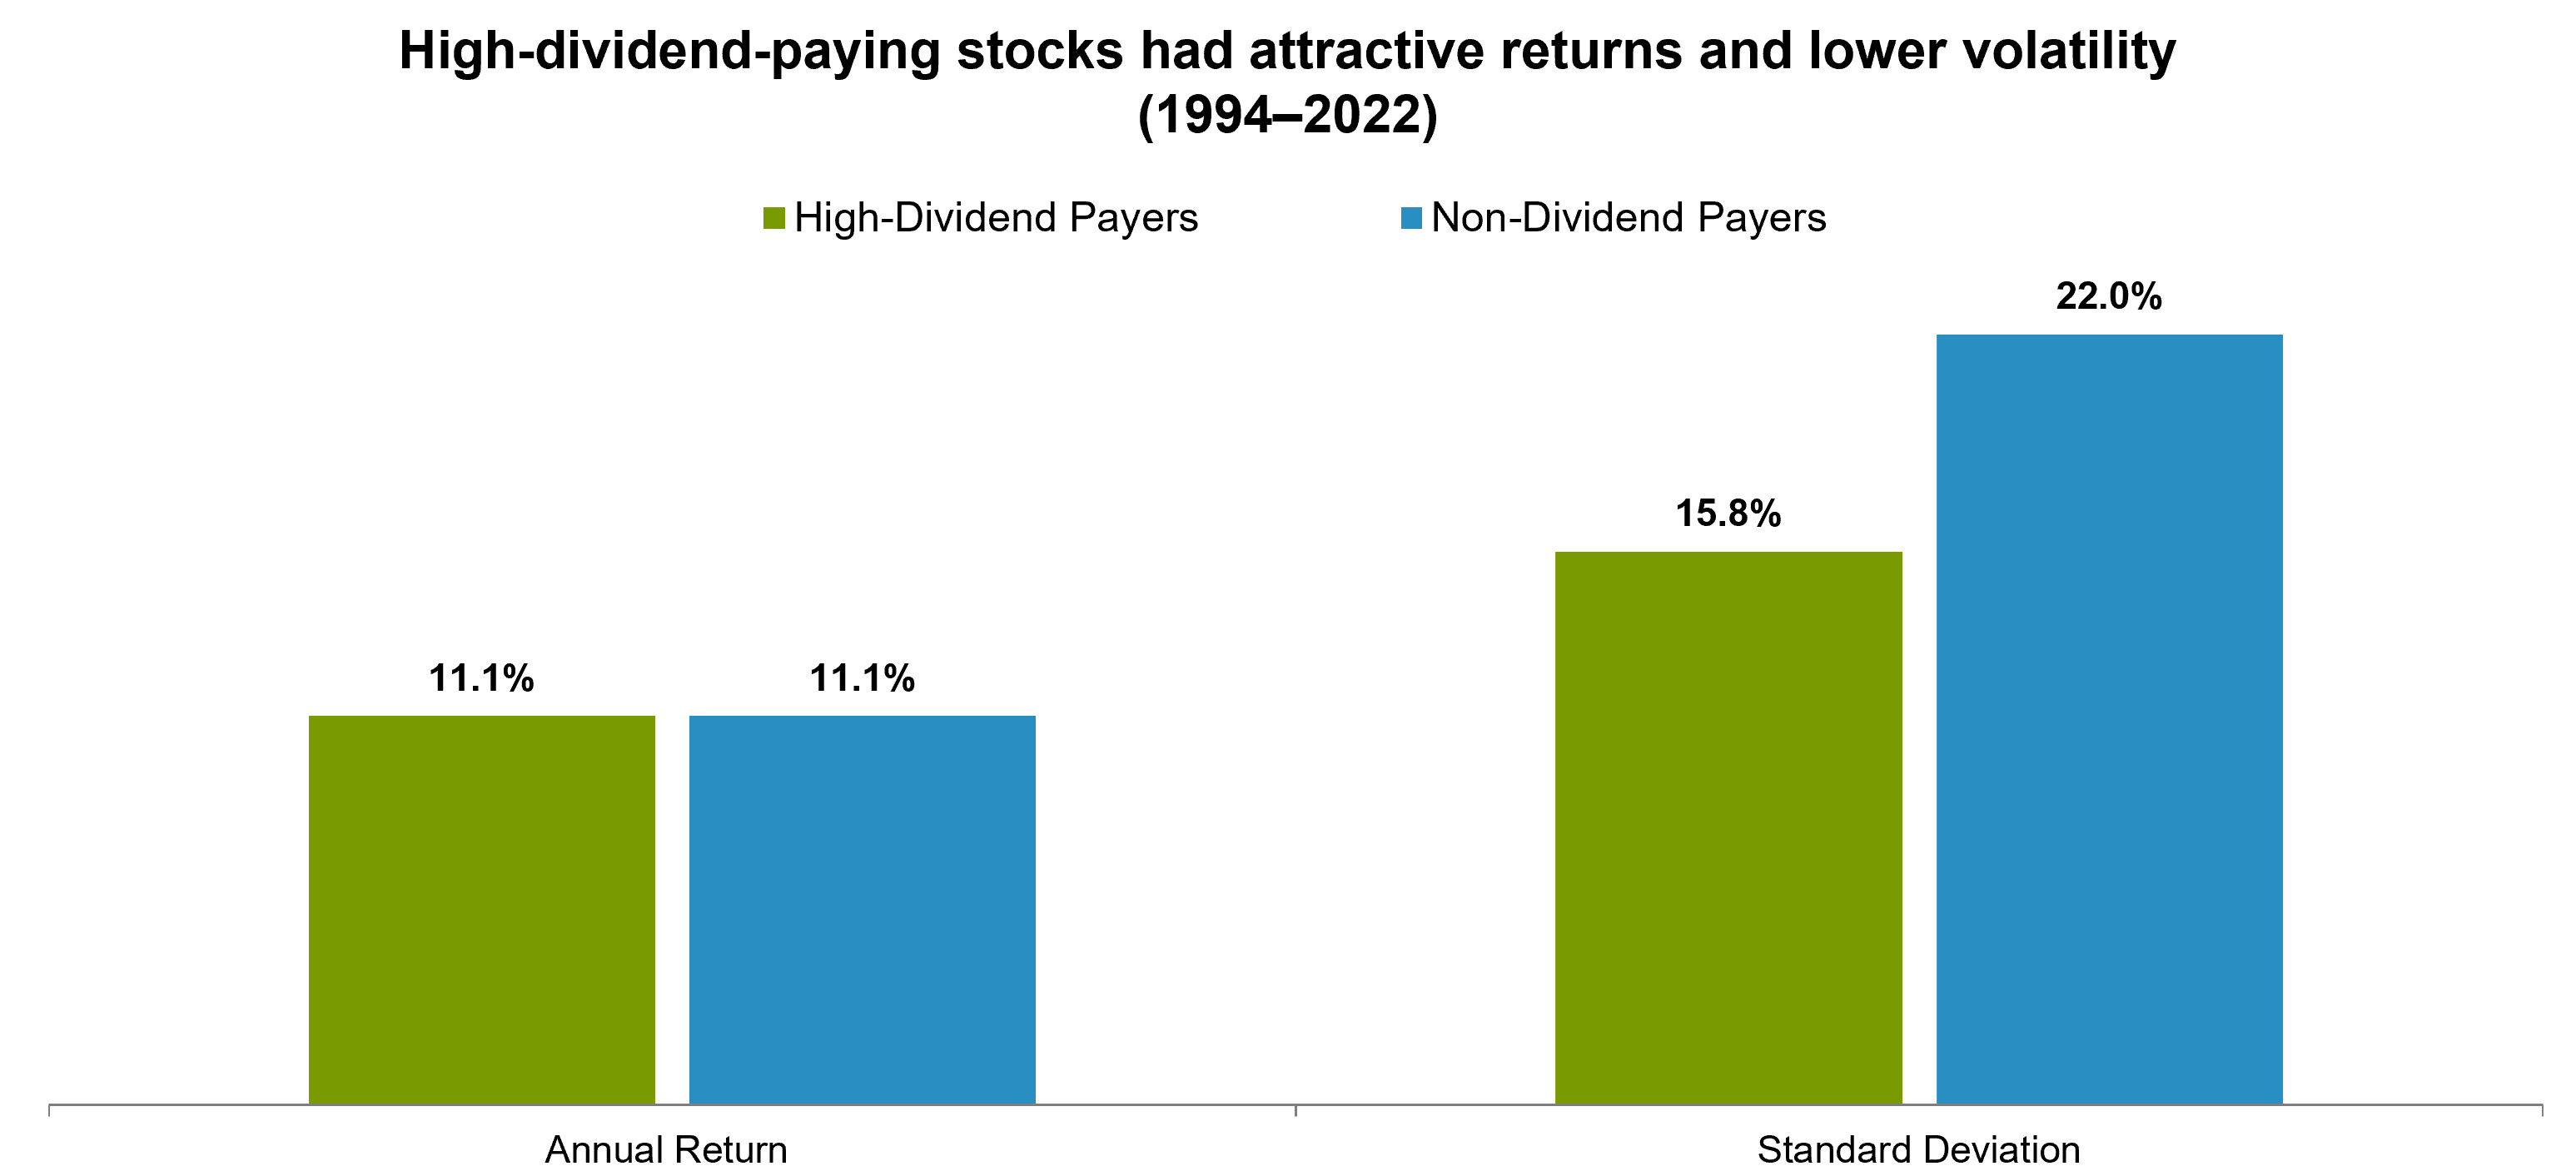 From 1994 to 2022, high dividend stocks had an annual return of 11.1%, compared to 15.8% for non dividend paying stocks. In the same period, the standard deviation of high dividend paying stocks was 11.1% compared to 22.0% for non dividend paying stocks.